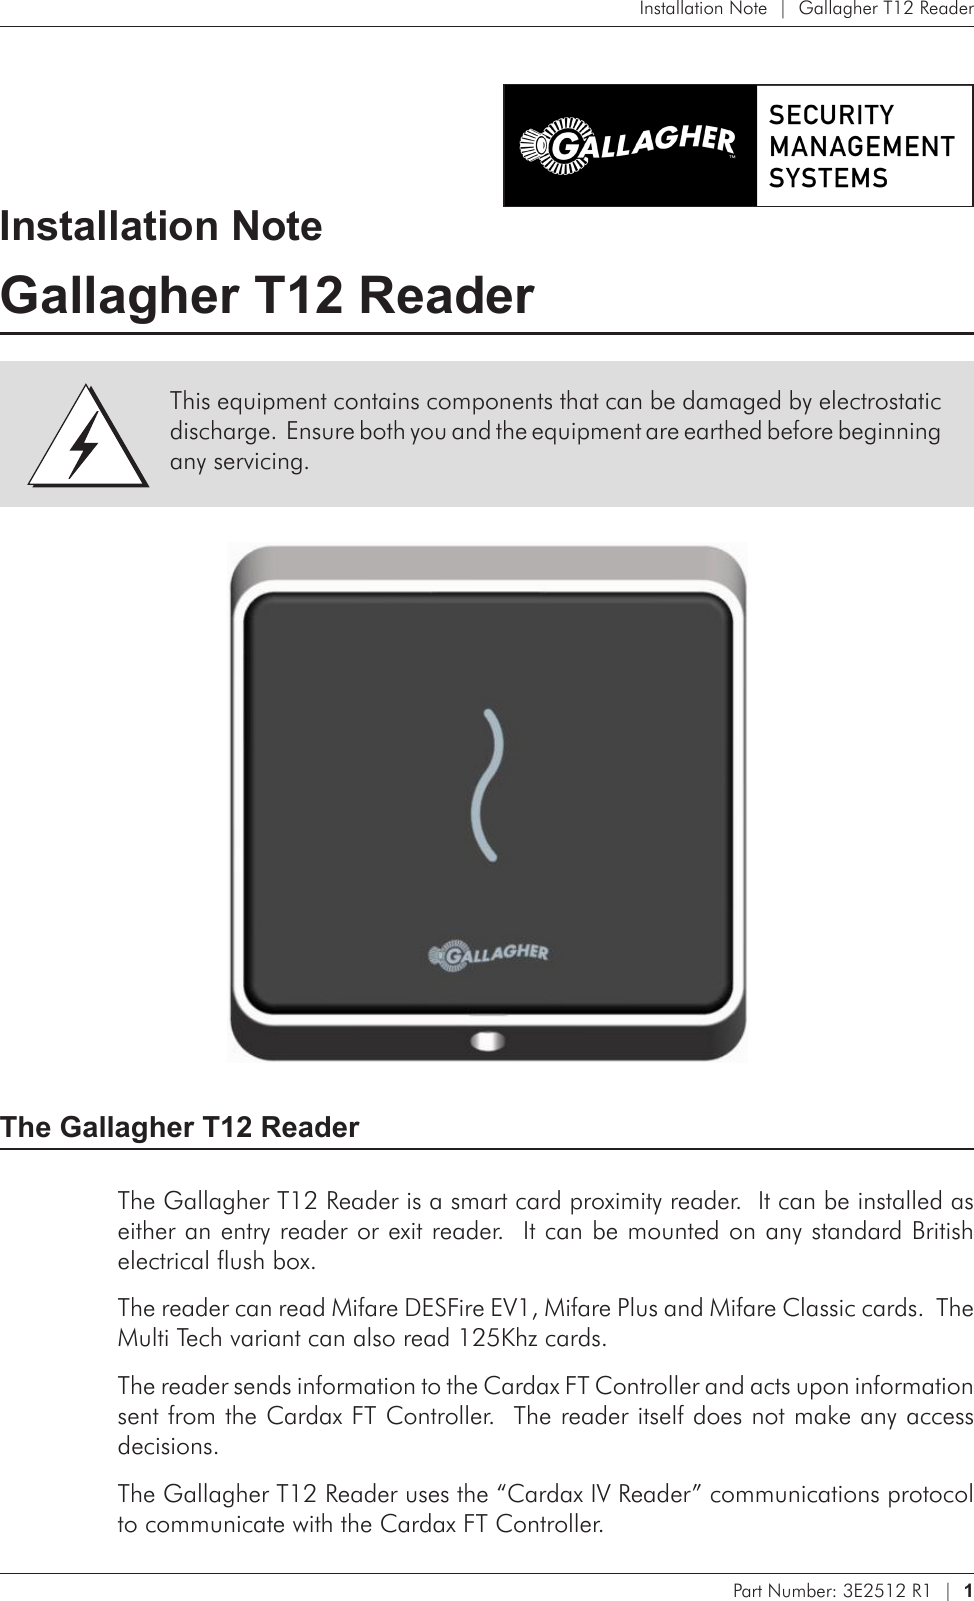 Part Number: 3E2512 R1  |  1   Installation Note  |  Gallagher T12 ReaderInstallation NoteGallagher T12 Reader The Gallagher T12 ReaderThe Gallagher T12 Reader is a smart card proximity reader.  It can be installed as either an entry reader or exit reader.  It can be mounted on any standard British electrical flush box.The reader can read Mifare DESFire EV1, Mifare Plus and Mifare Classic cards.  The Multi Tech variant can also read 125Khz cards.The reader sends information to the Cardax FT Controller and acts upon information sent from the Cardax FT Controller.  The reader itself does not make any access decisions.The Gallagher T12 Reader uses the “Cardax IV Reader” communications protocol to communicate with the Cardax FT Controller.This equipment contains components that can be damaged by electrostatic discharge.  Ensure both you and the equipment are earthed before beginning any servicing.